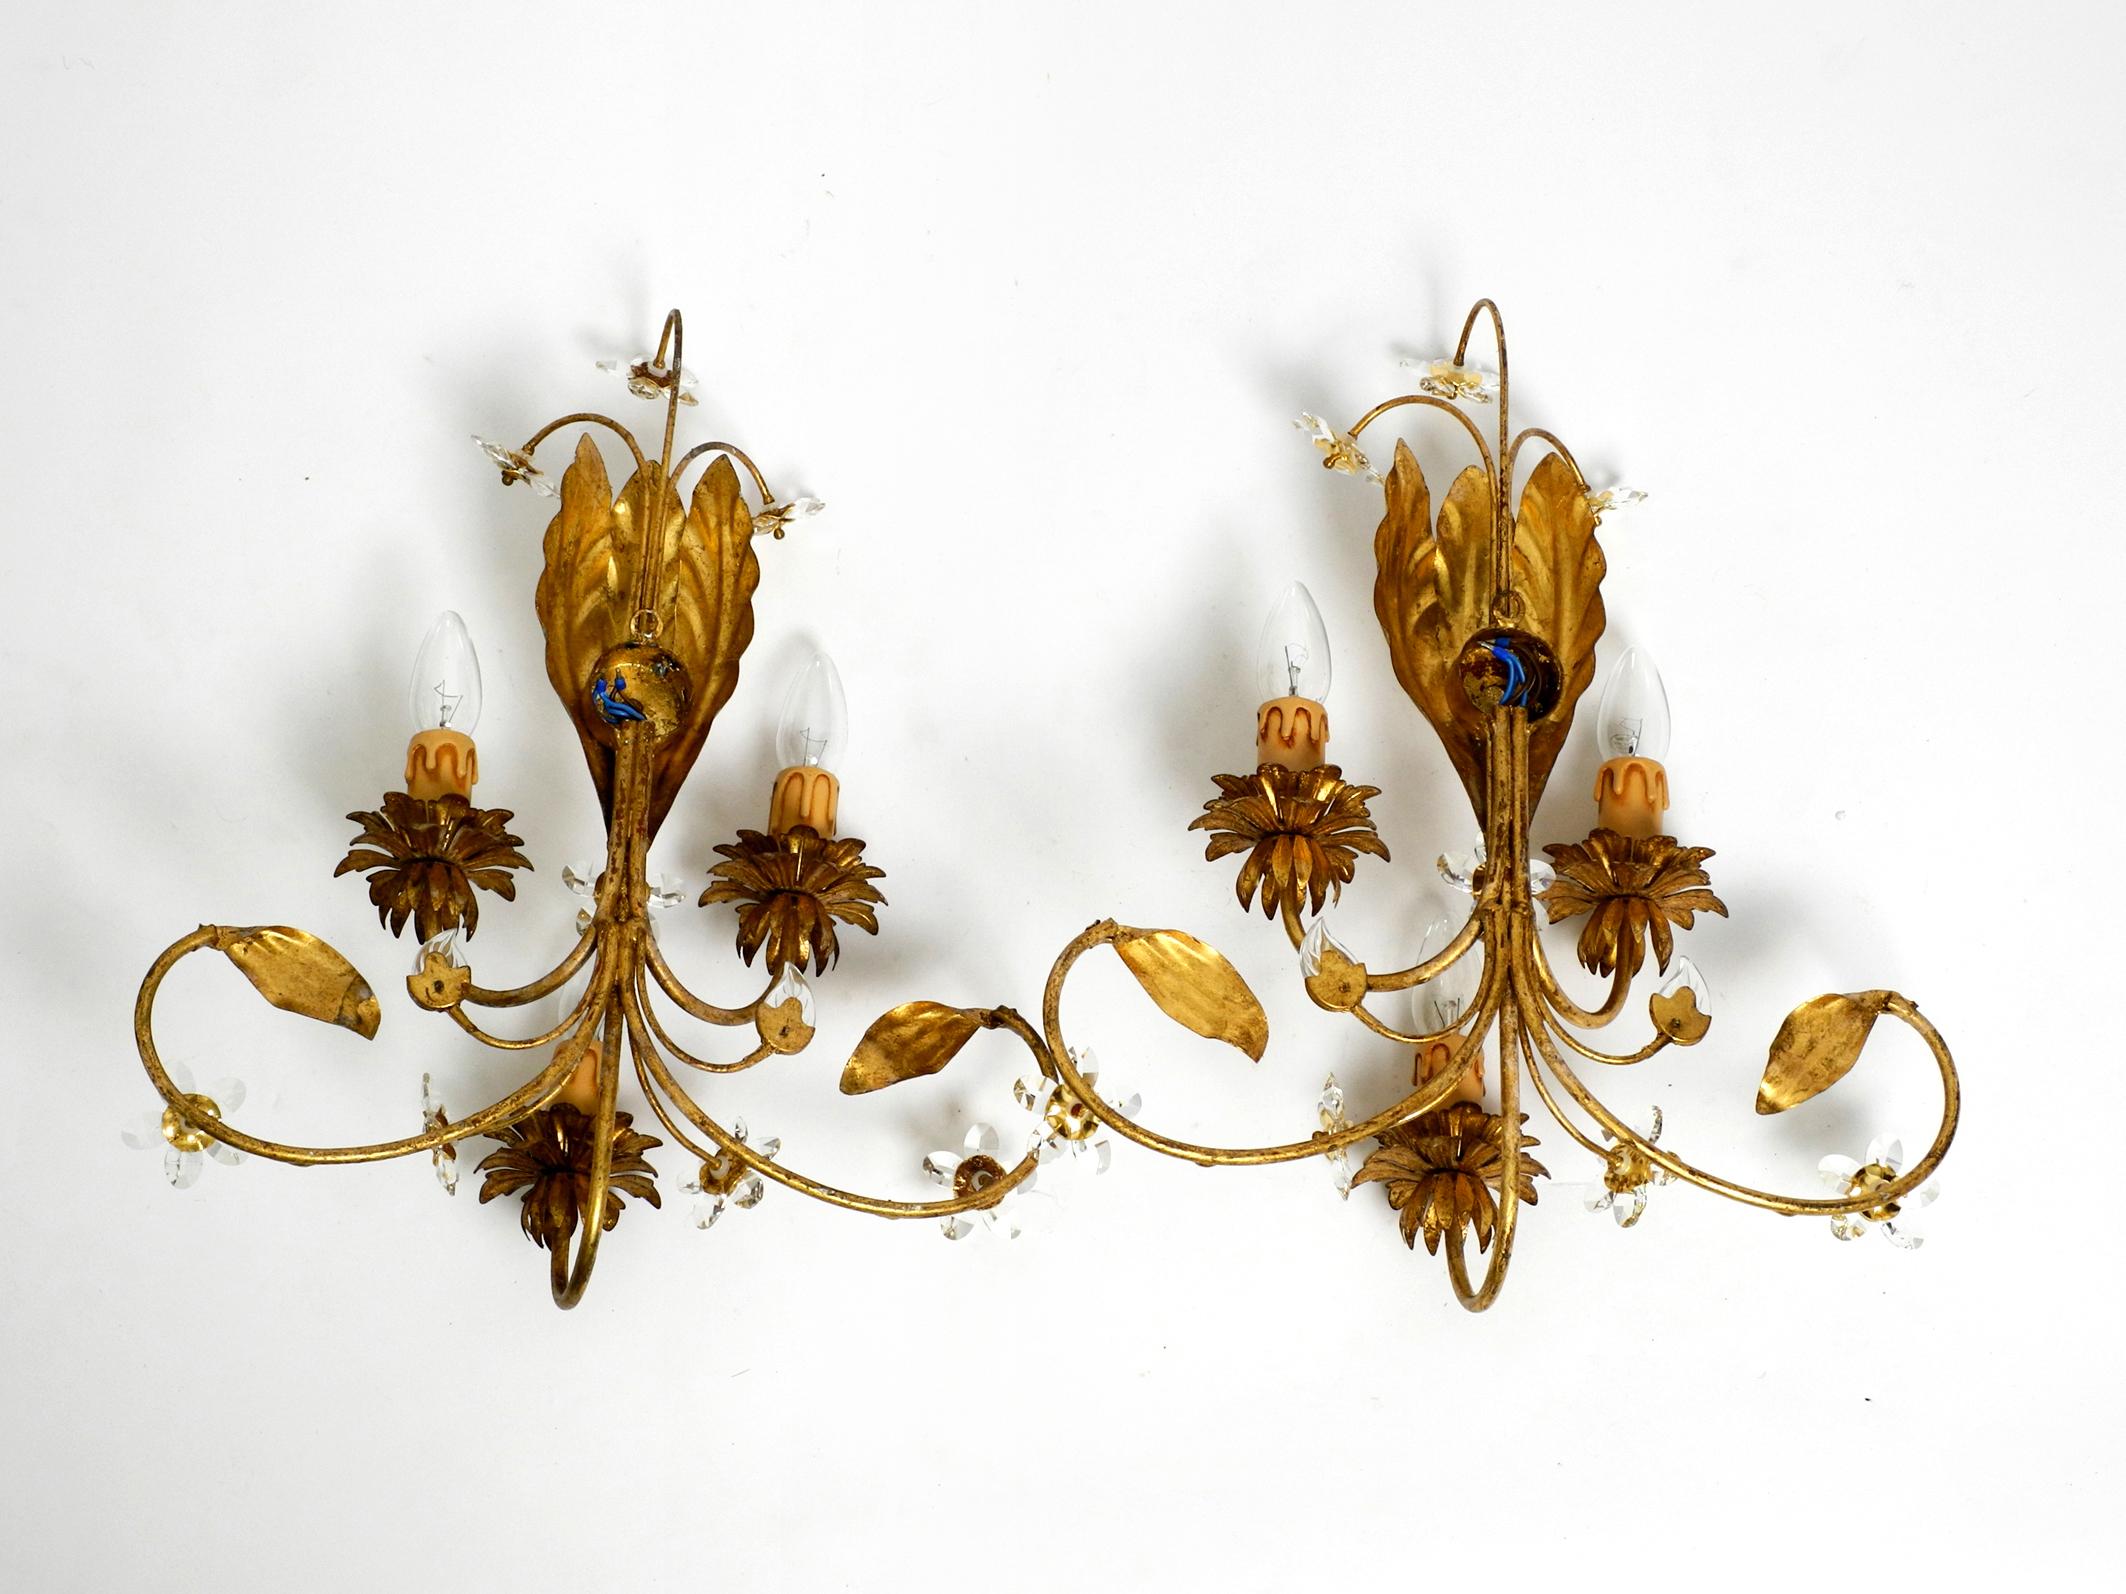 Pair of Elegant Gold Plated Italian 1980s Floral Regency Murano Glass Sconces For Sale 5